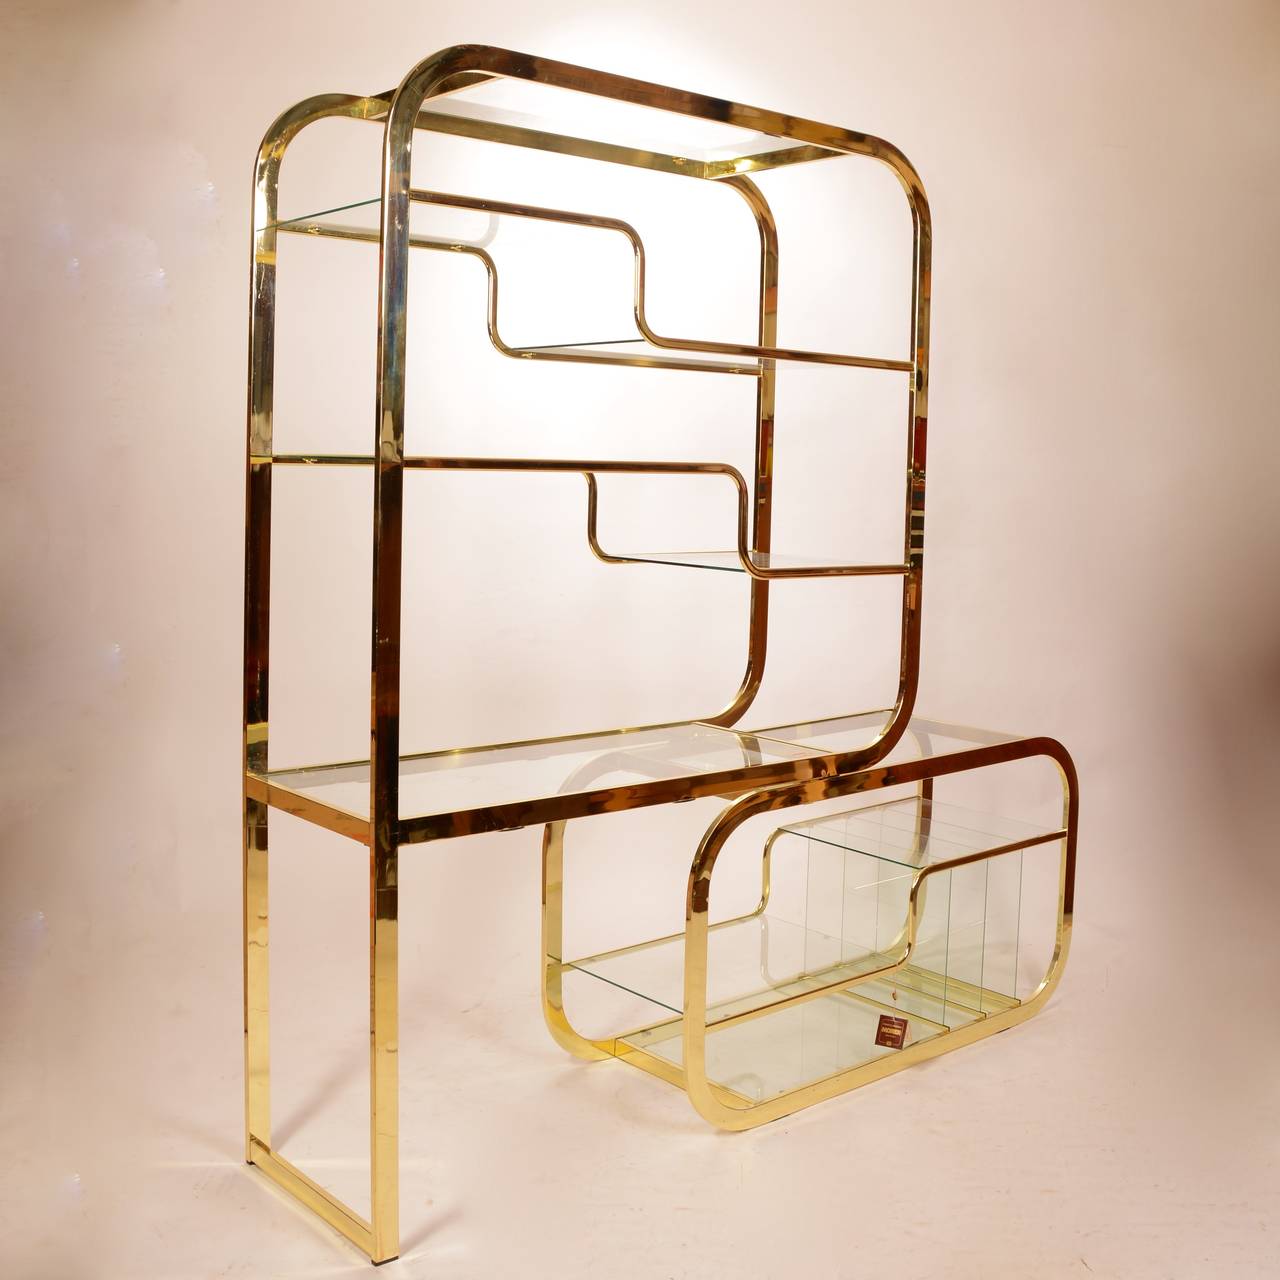 Brass and glass Etagere by Milo Baughman for Morex of Italy. This unit features a cantilever base that can moved to widen the design or make it more compact. Retains the original Morex of Italy sticker and tag.